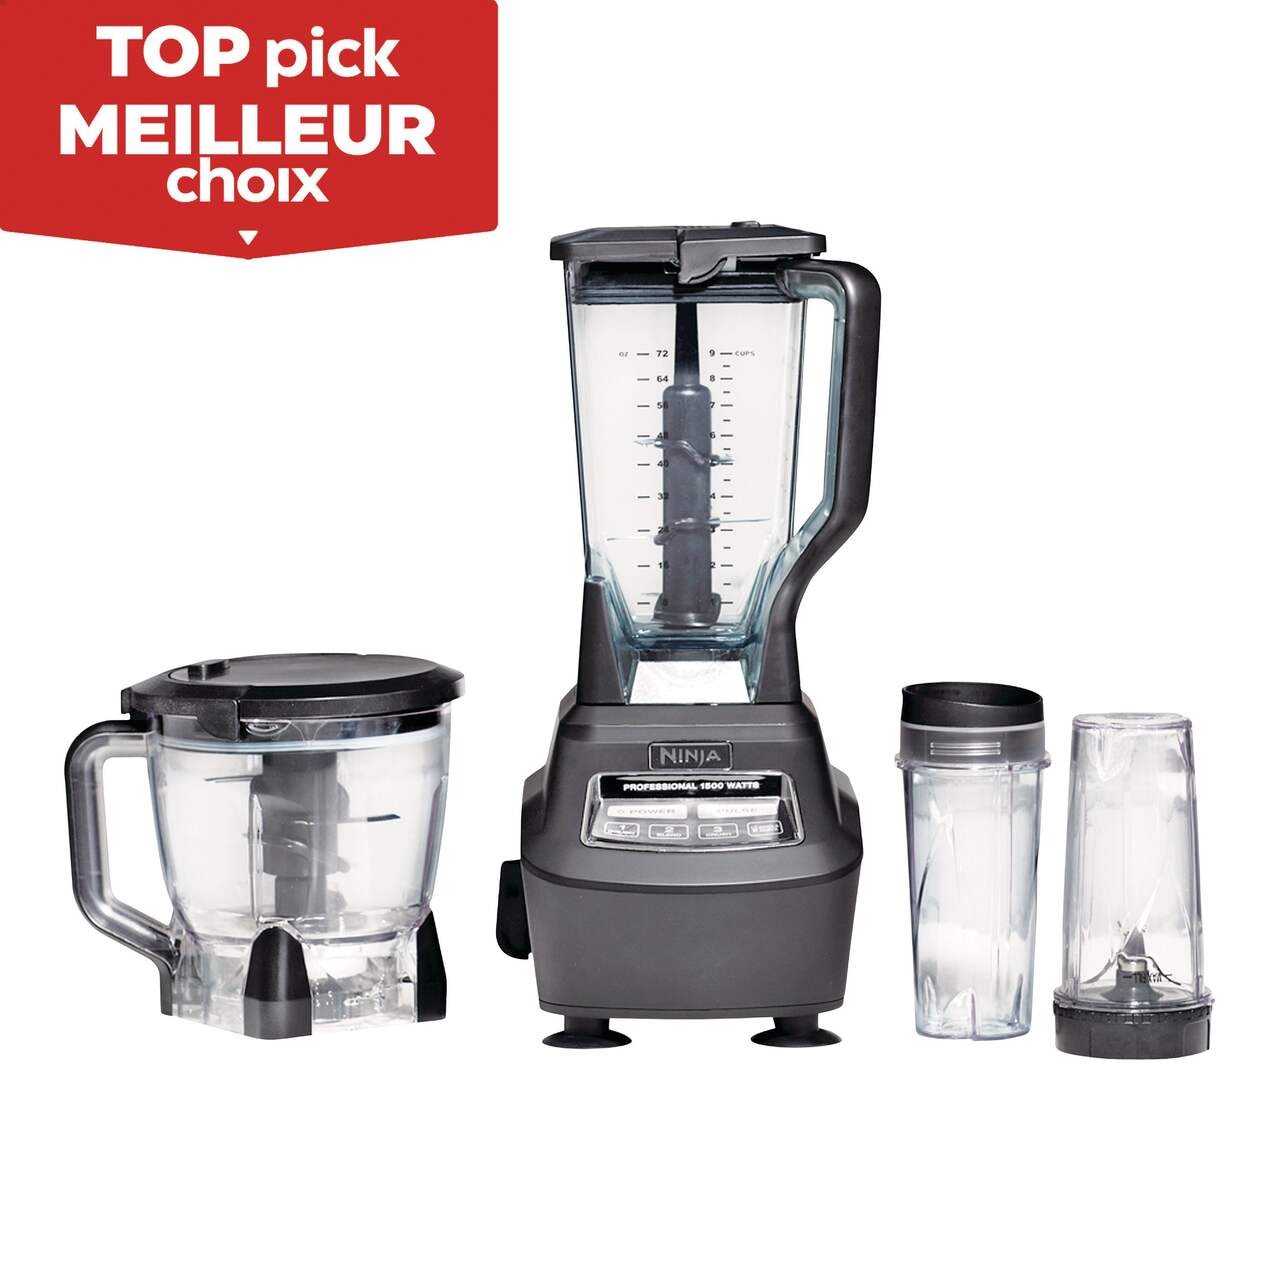 https://media-www.canadiantire.ca/product/living/kitchen/kitchen-appliances/0431268/ninja-mega-kitchen-system-bfd3d891-75a4-4477-8f54-f47d9ea417de-jpgrendition.jpg?imdensity=1&imwidth=640&impolicy=mZoom